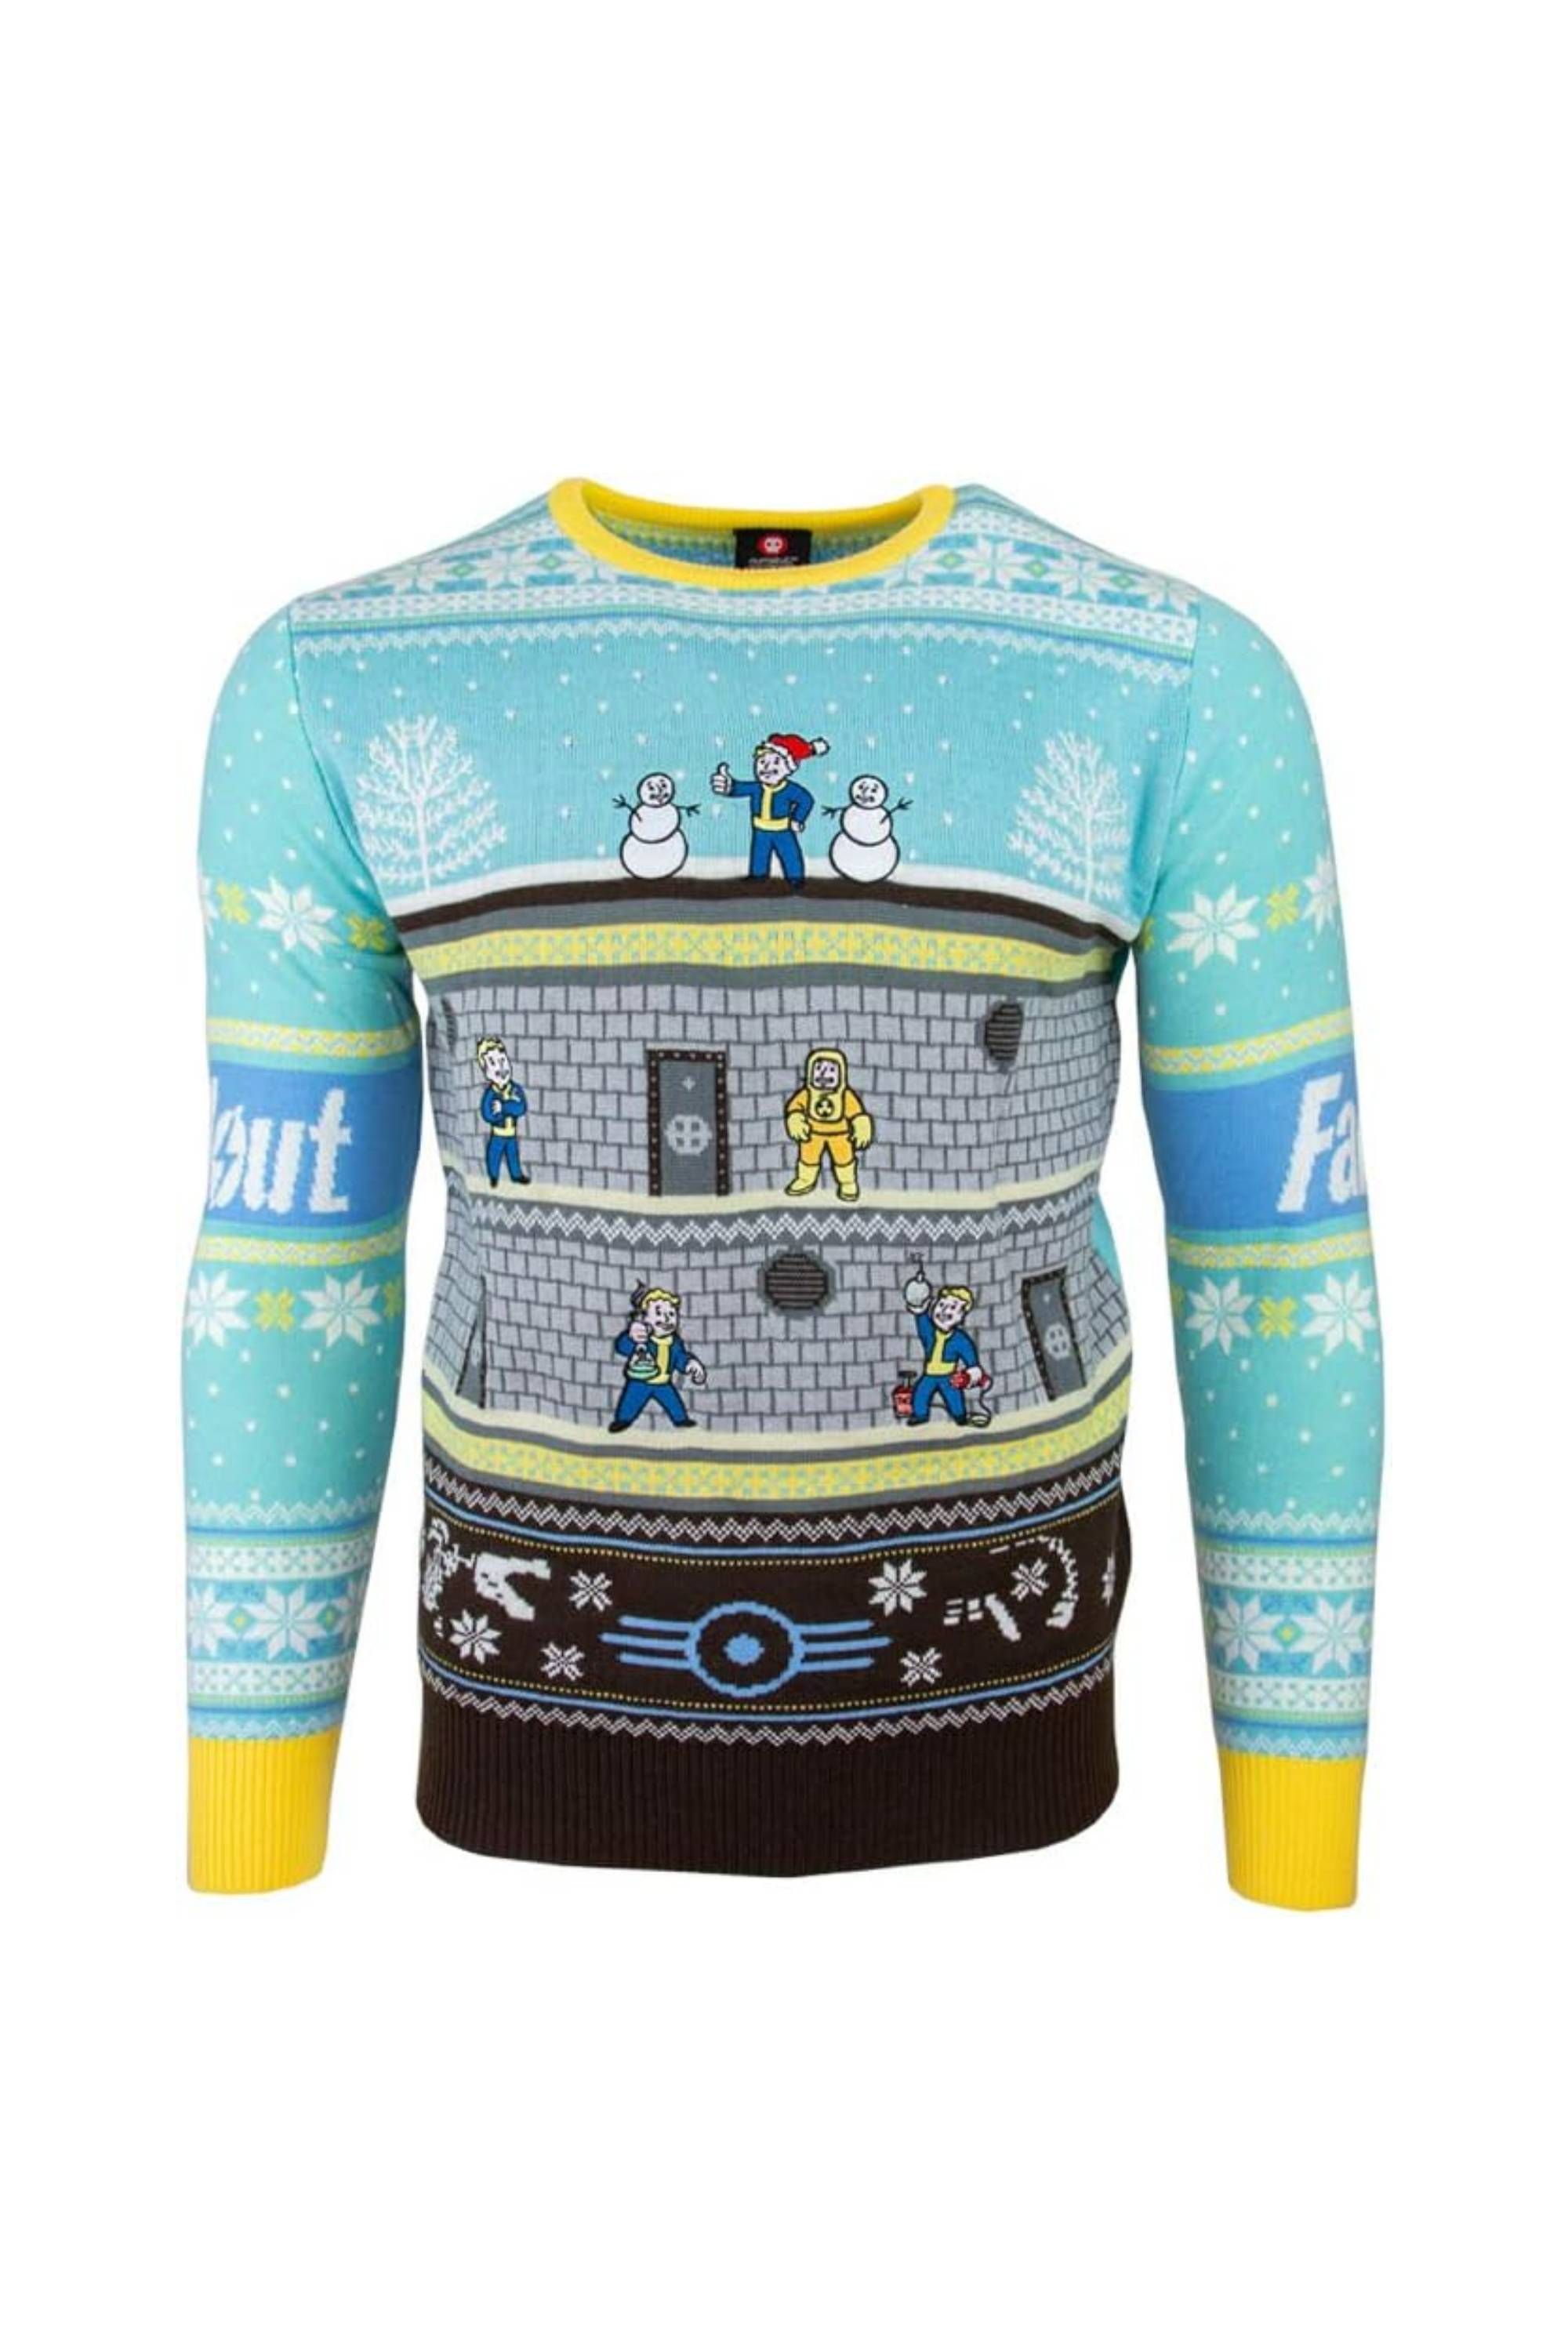 Numskull Official Fallout Vault Ugly Christmas Sweater